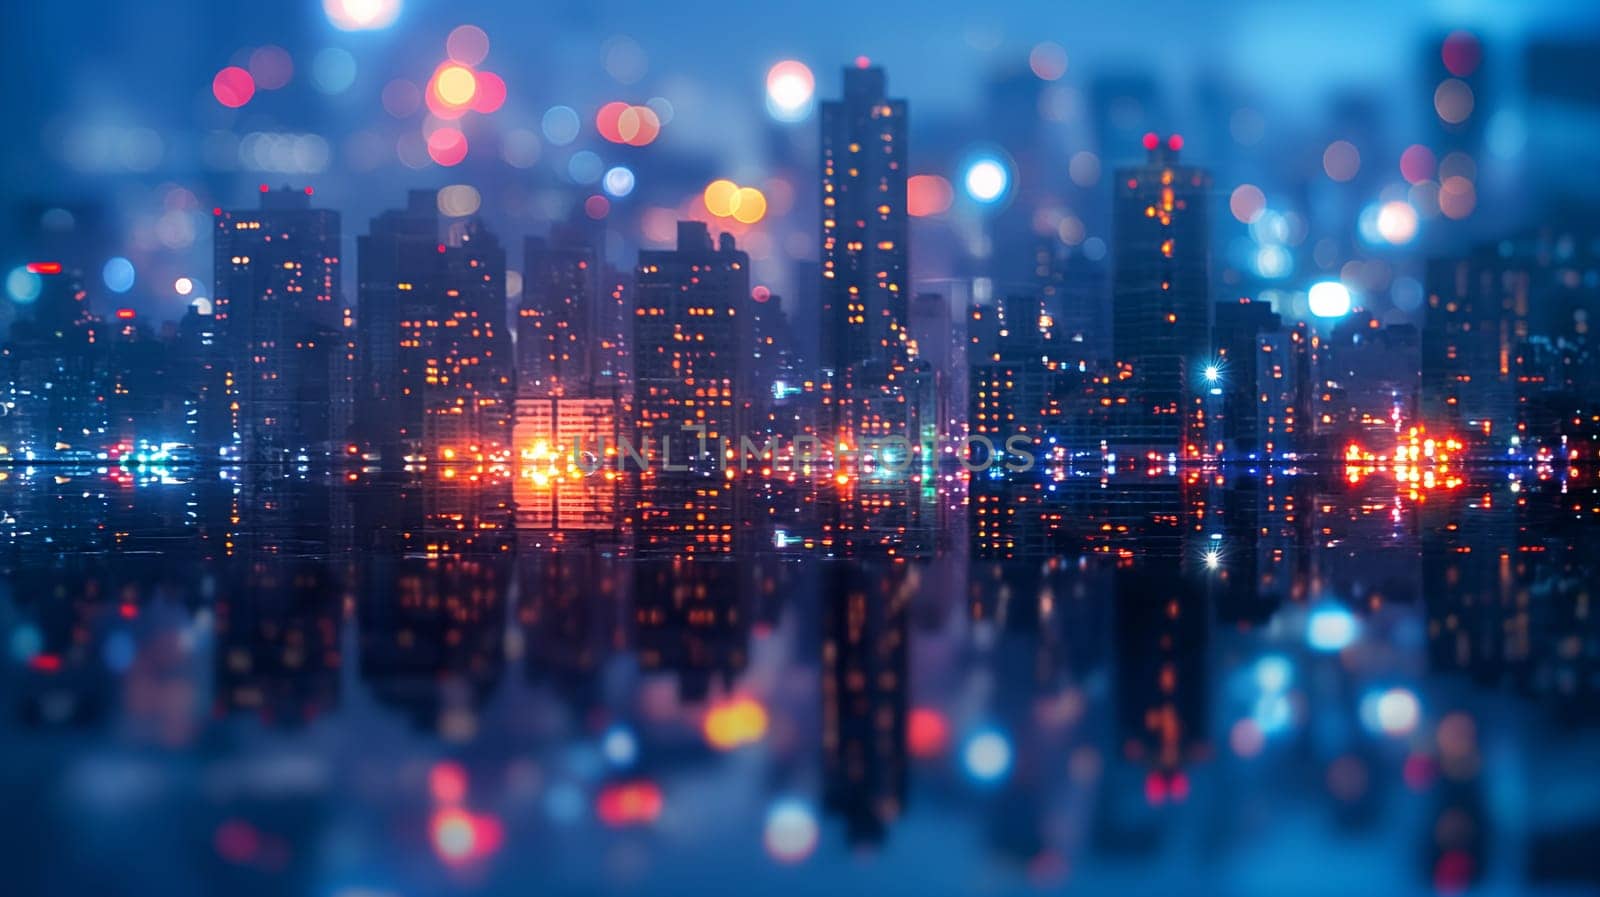 Twilight Cityscape With Blurred Lights and Reflections by chrisroll